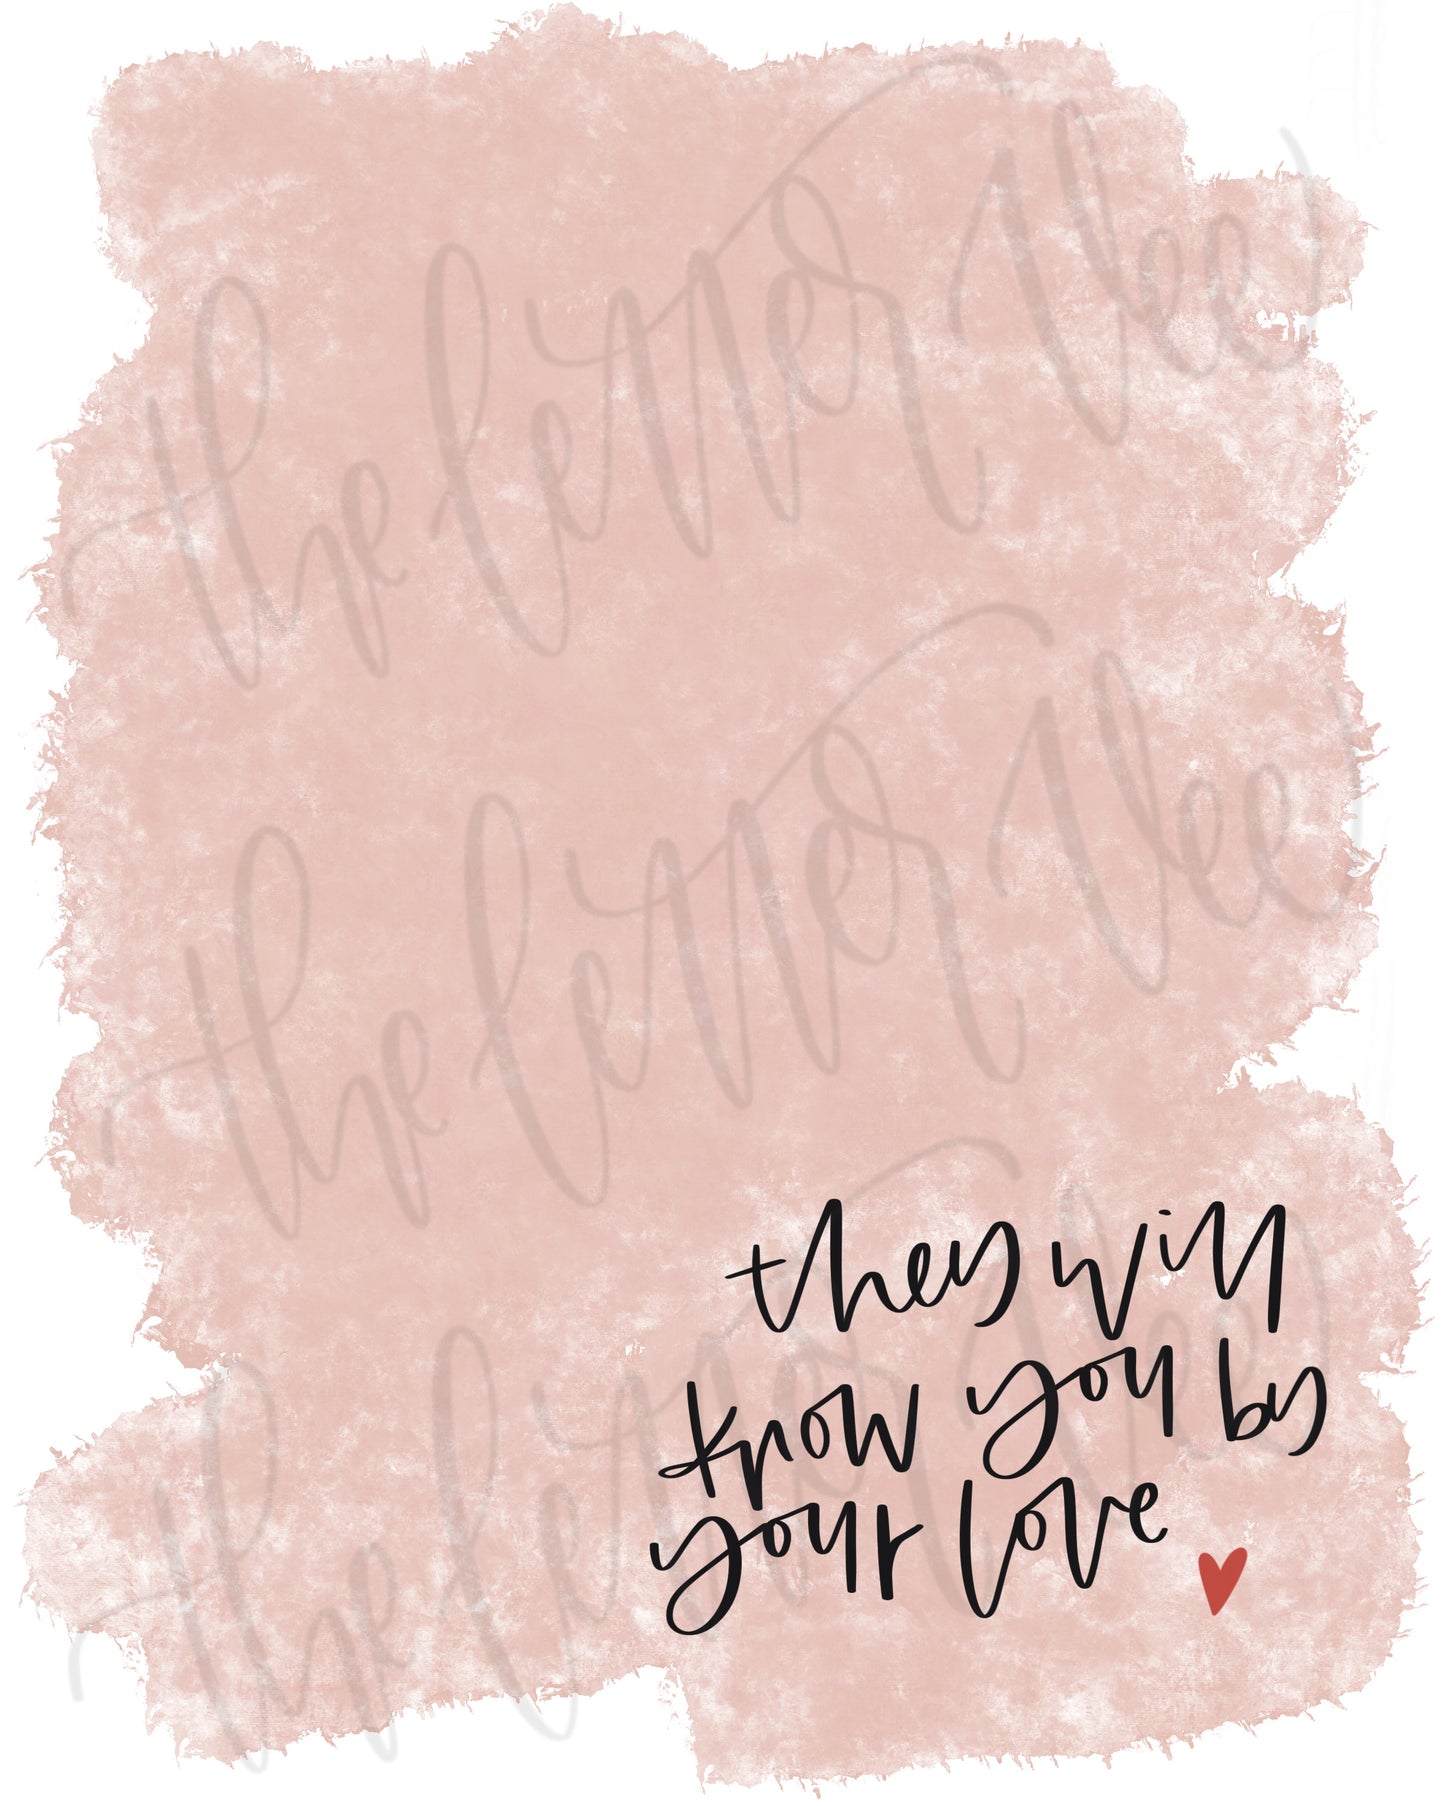 They will know you by your love | prints